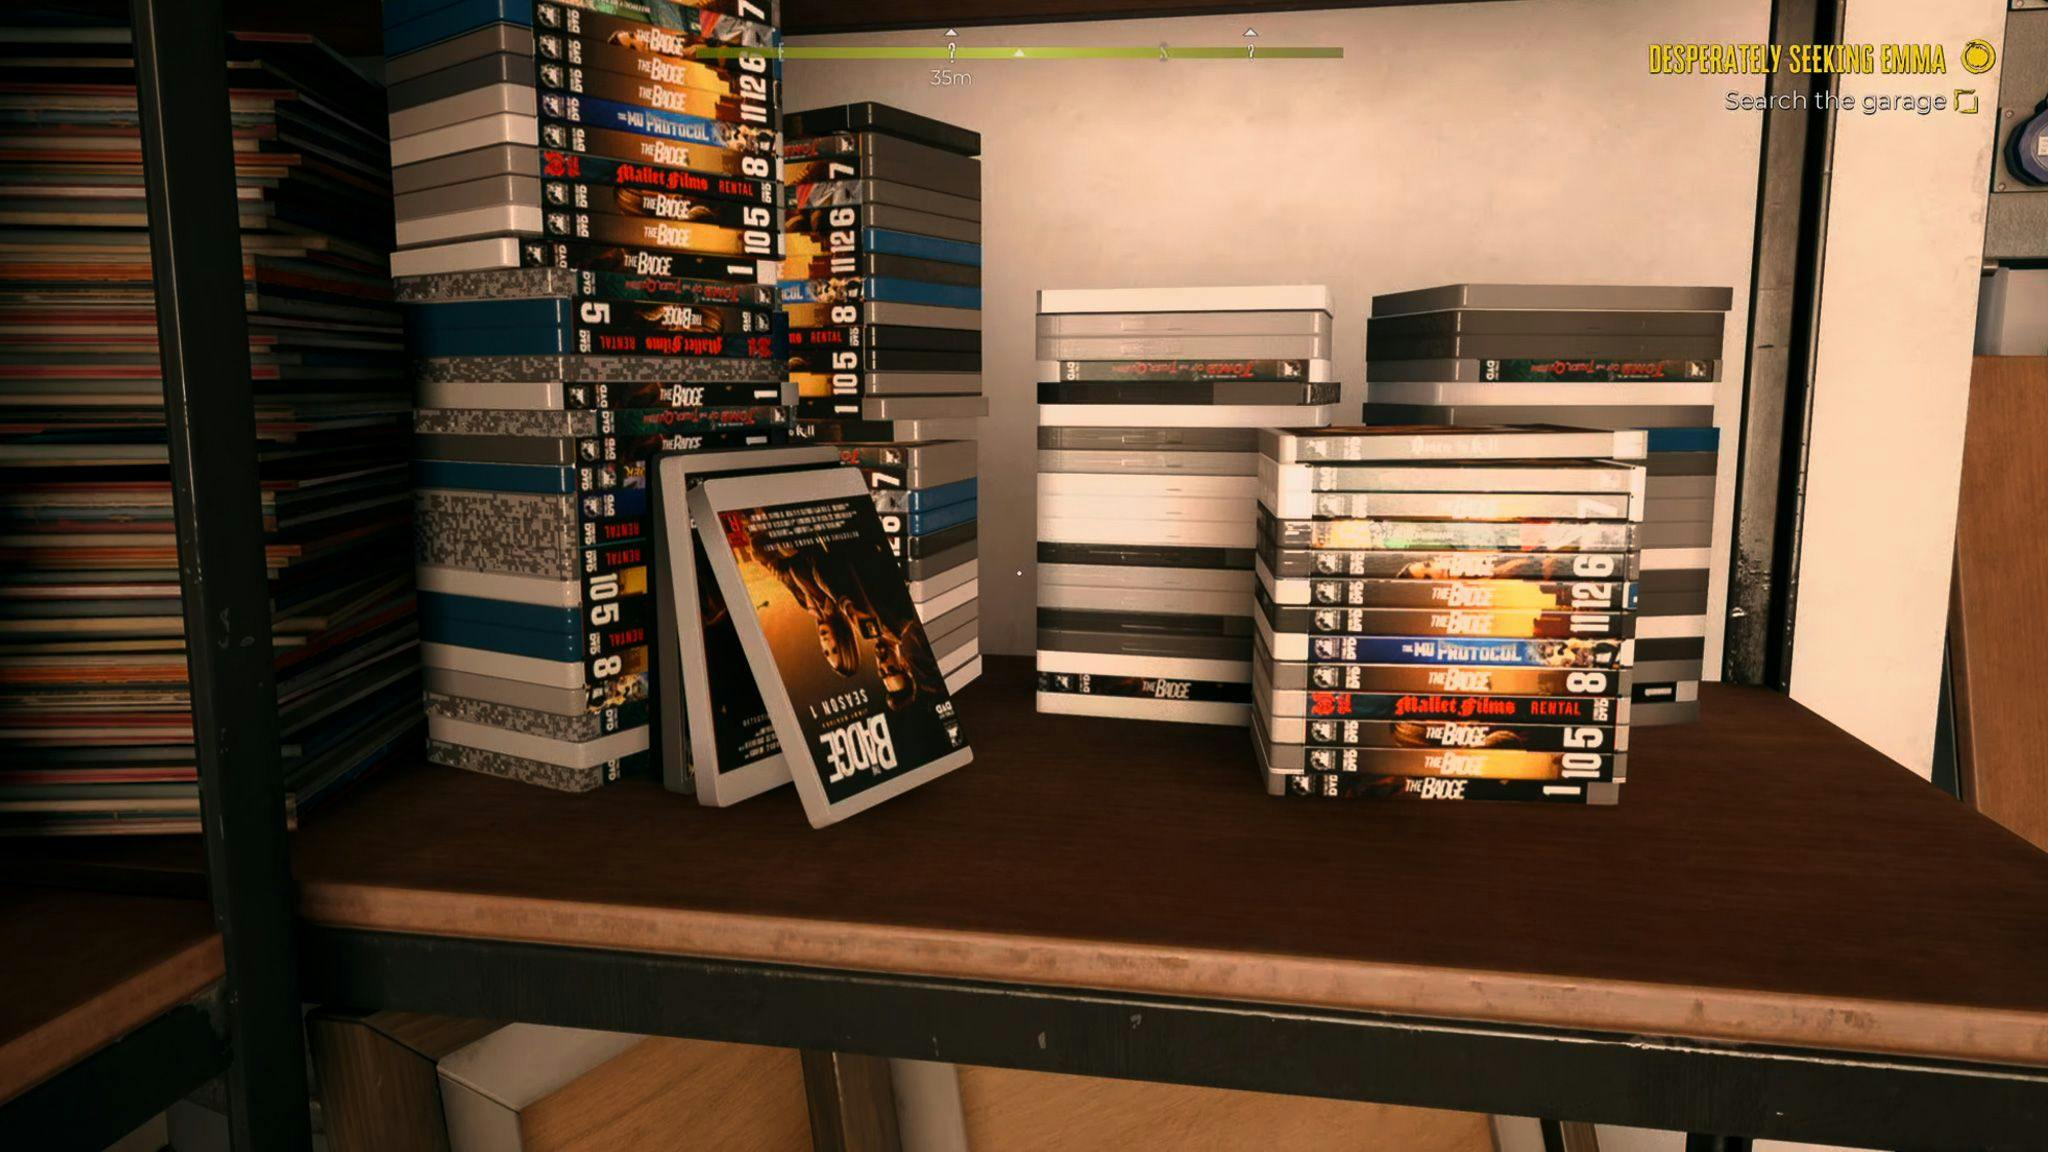 A screenshot from Dead Island 2 depicting stacks of DVD cases.